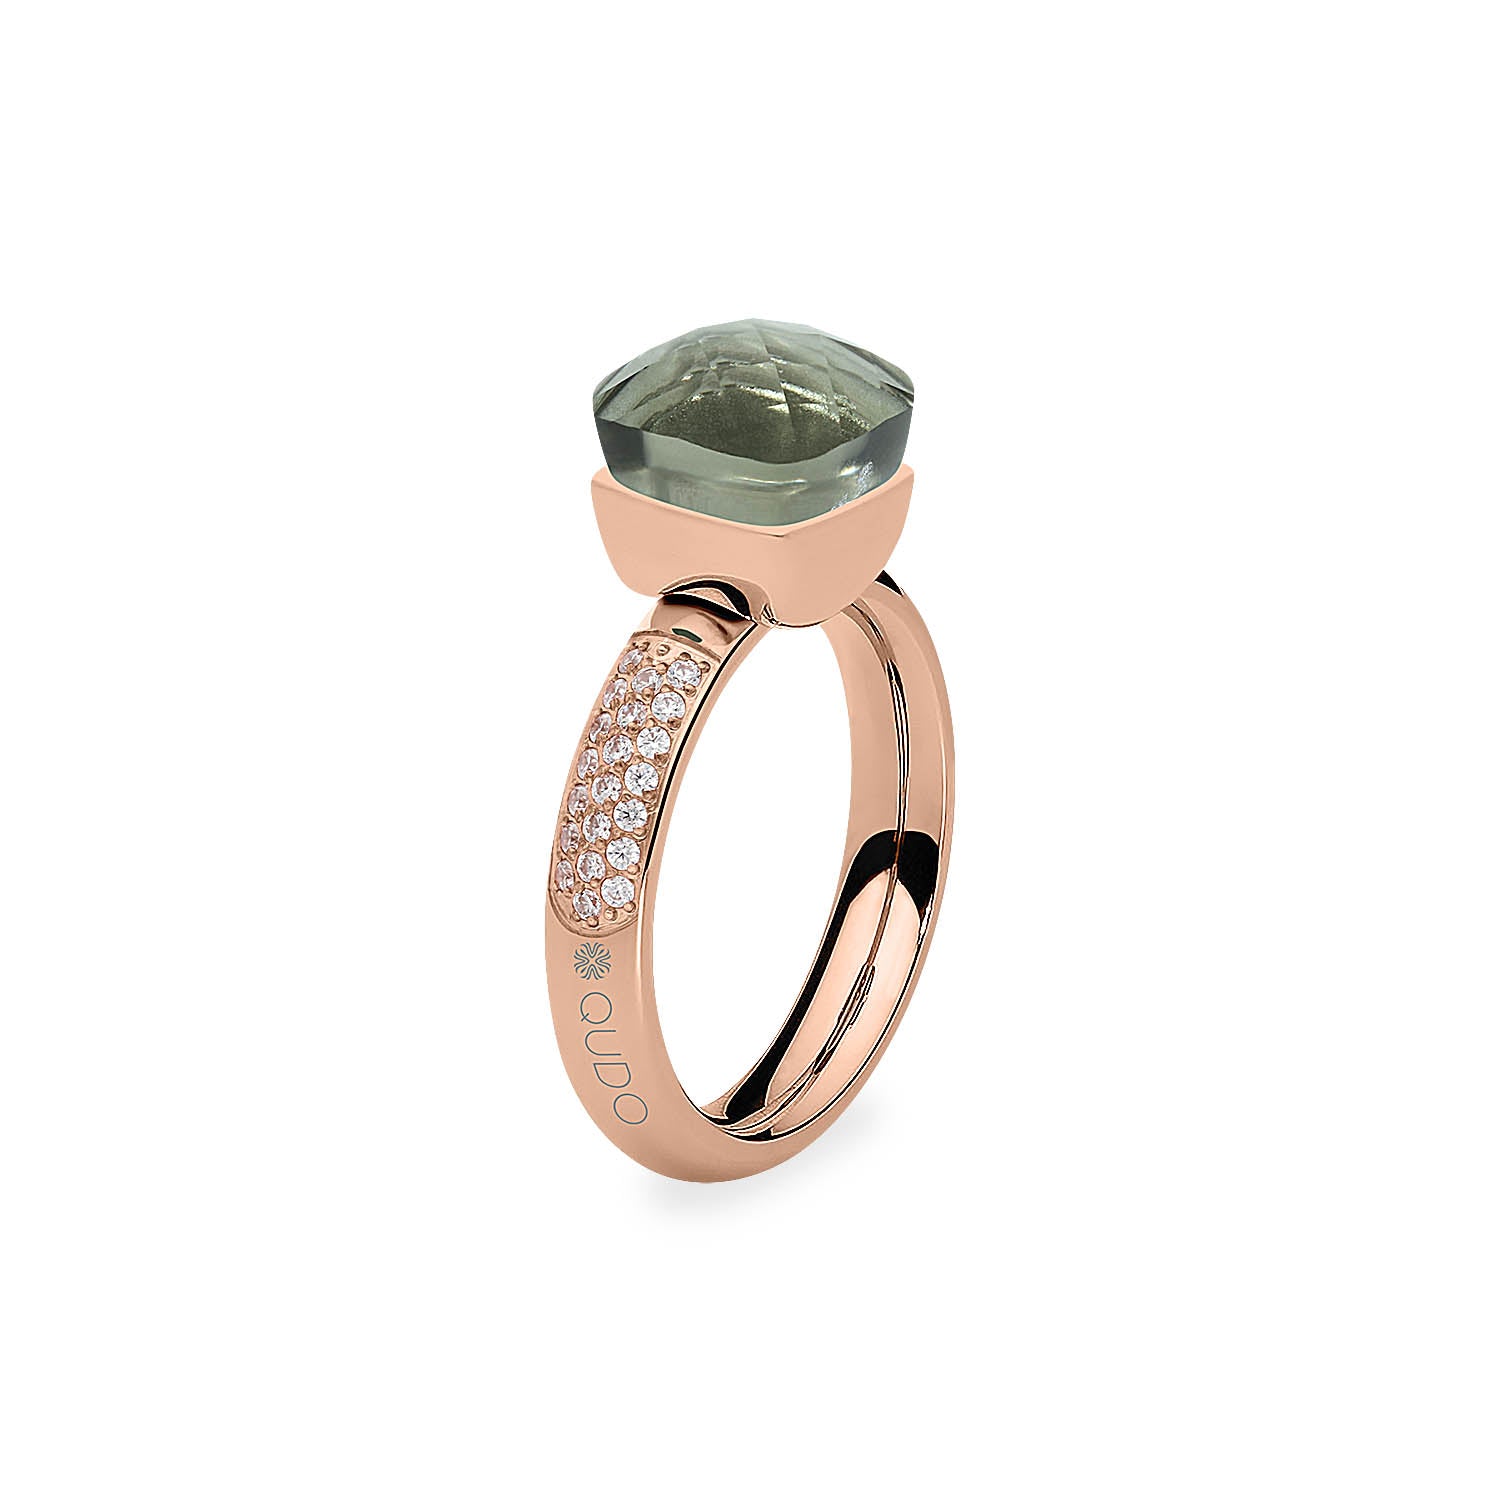 Firenze Deluxe Ring - Shades of Rose & Grey - Roségold